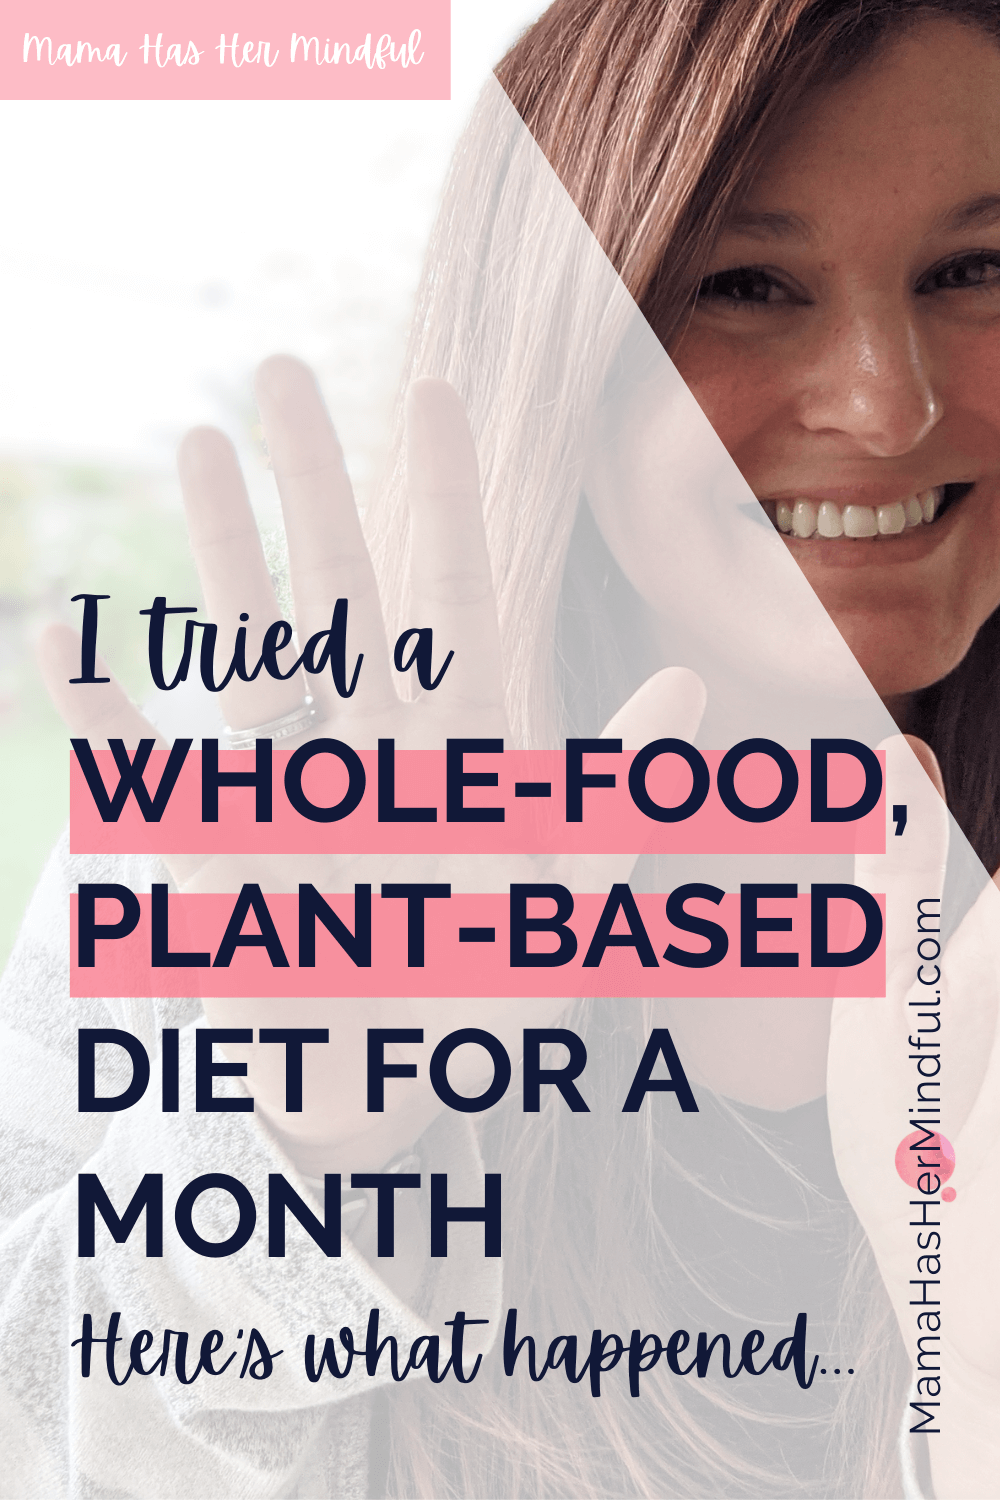 I Tried a Whole-Food, Plant-Based Diet - Here’s How it Went: Week 4